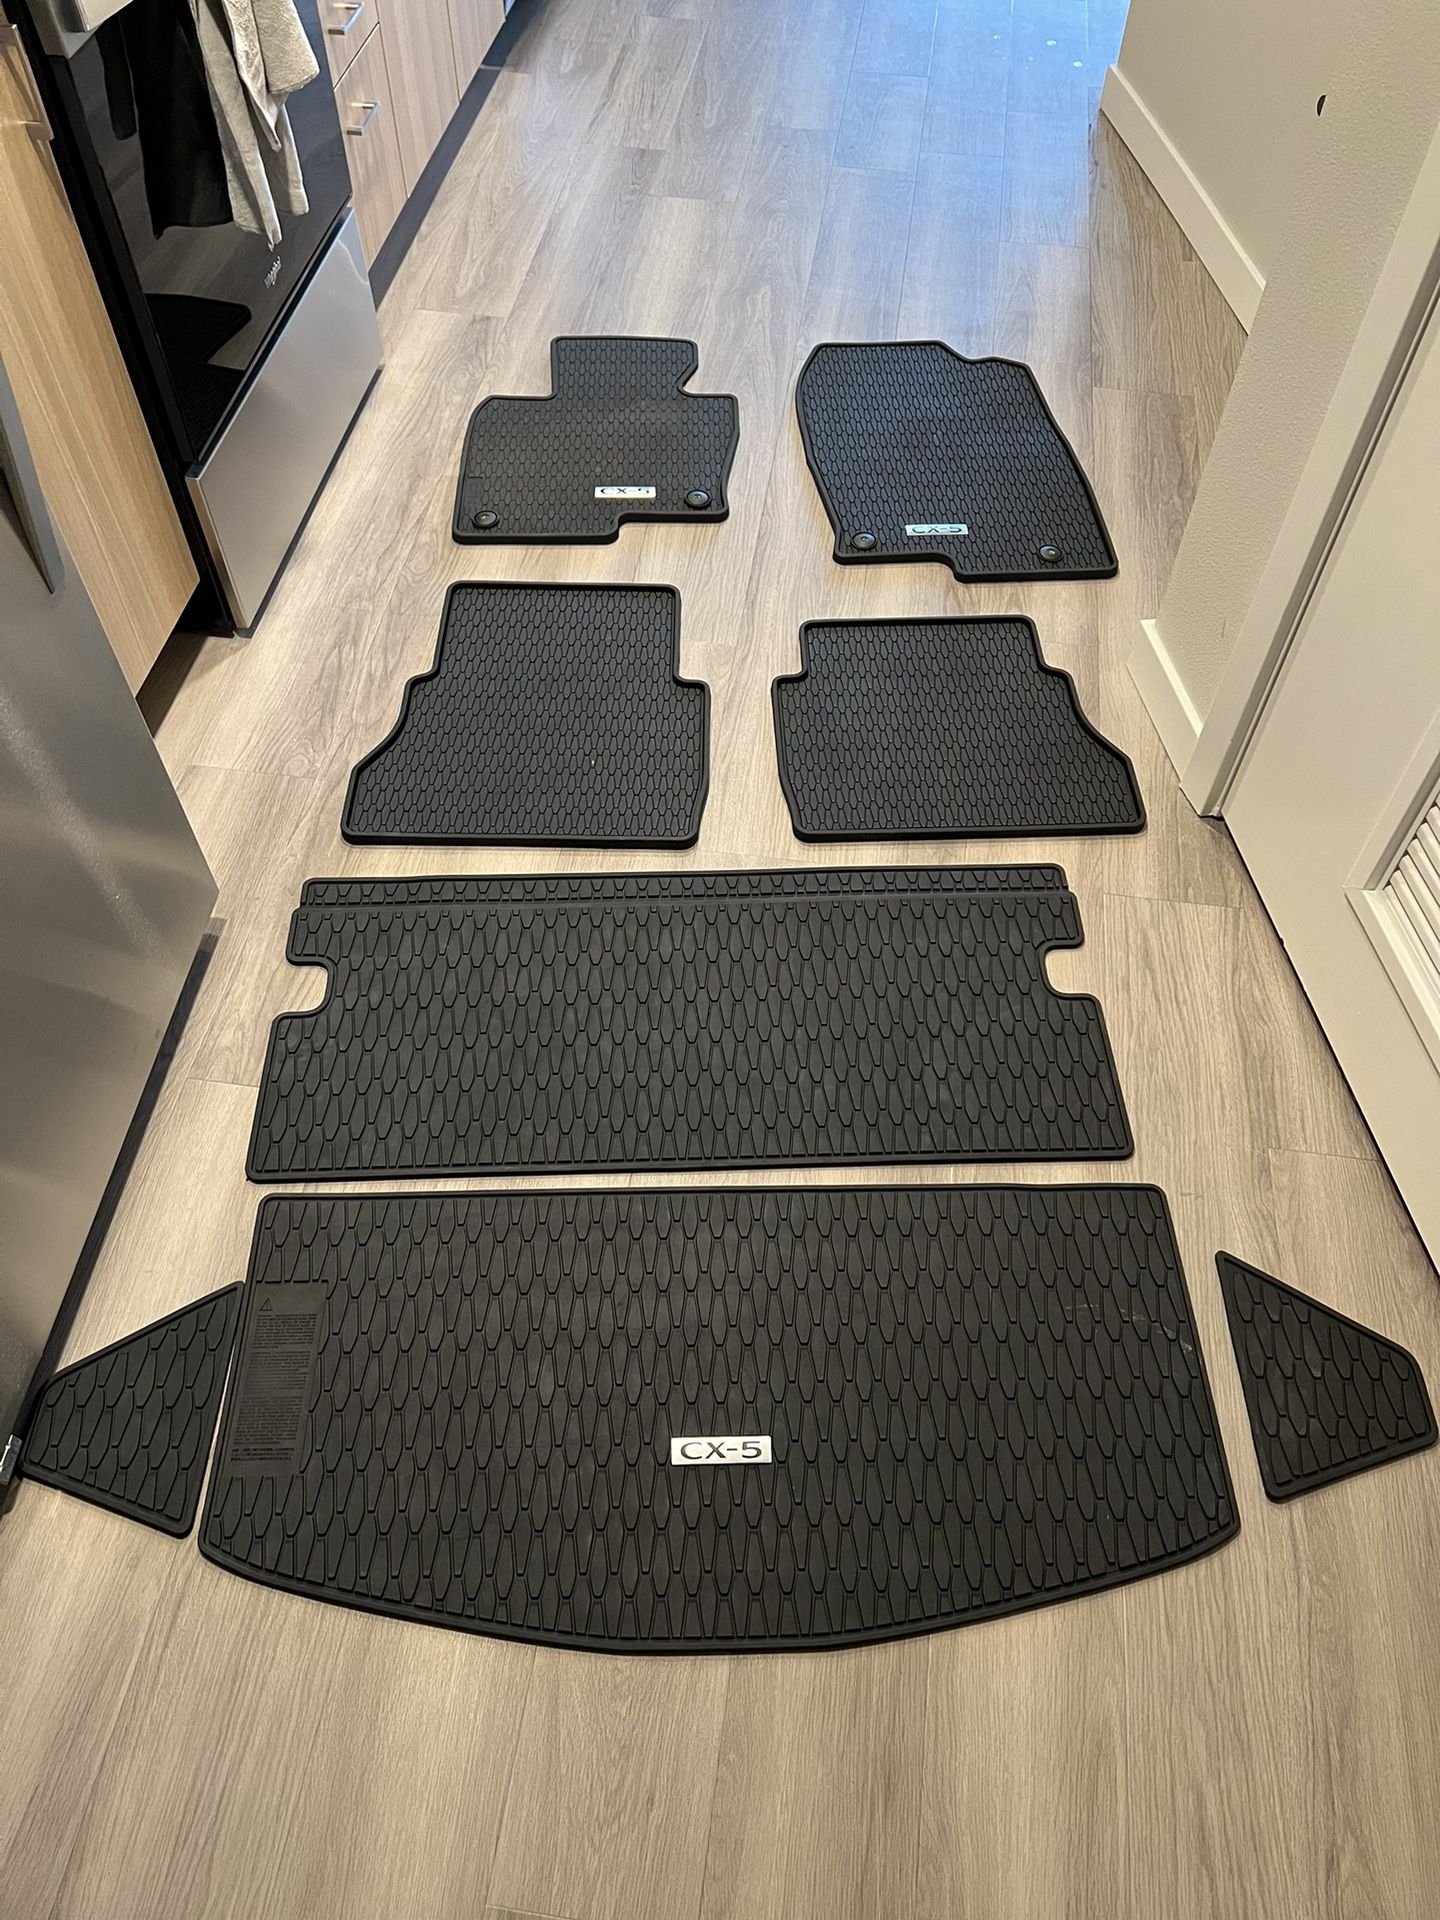 Mazda CX-5 OEM All Weather Floor Mats (2nd Generation CX-5)